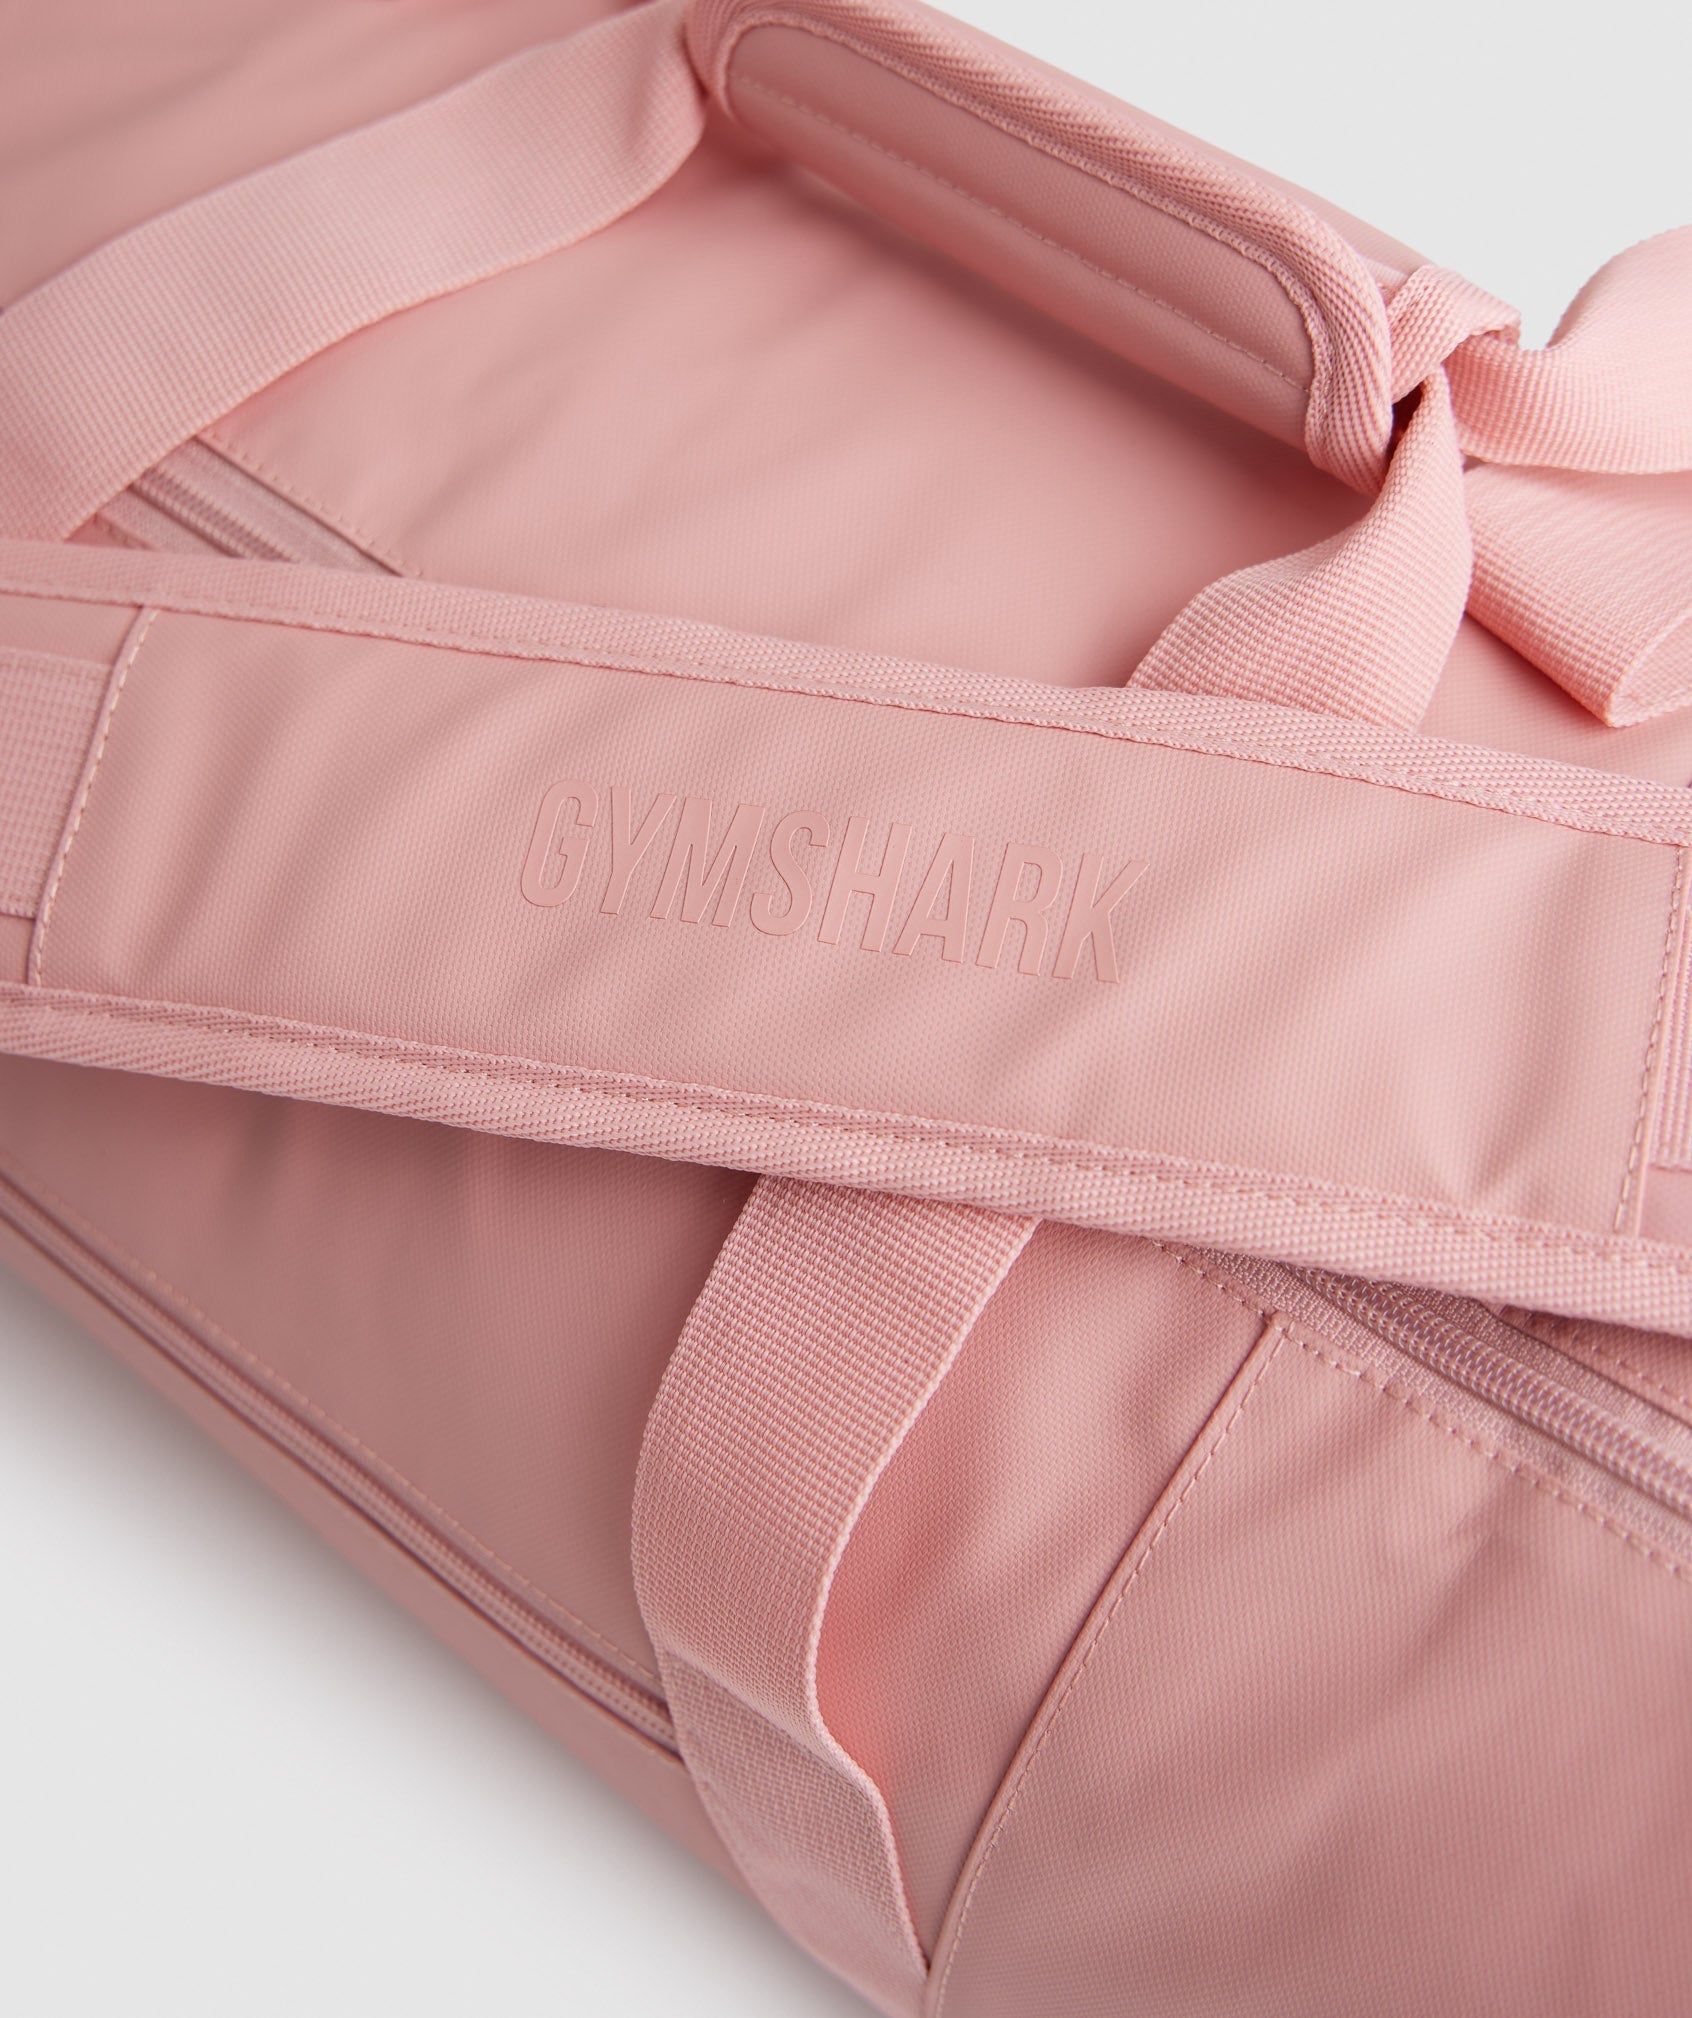 Barrel Bag in Paige Pink - view 5